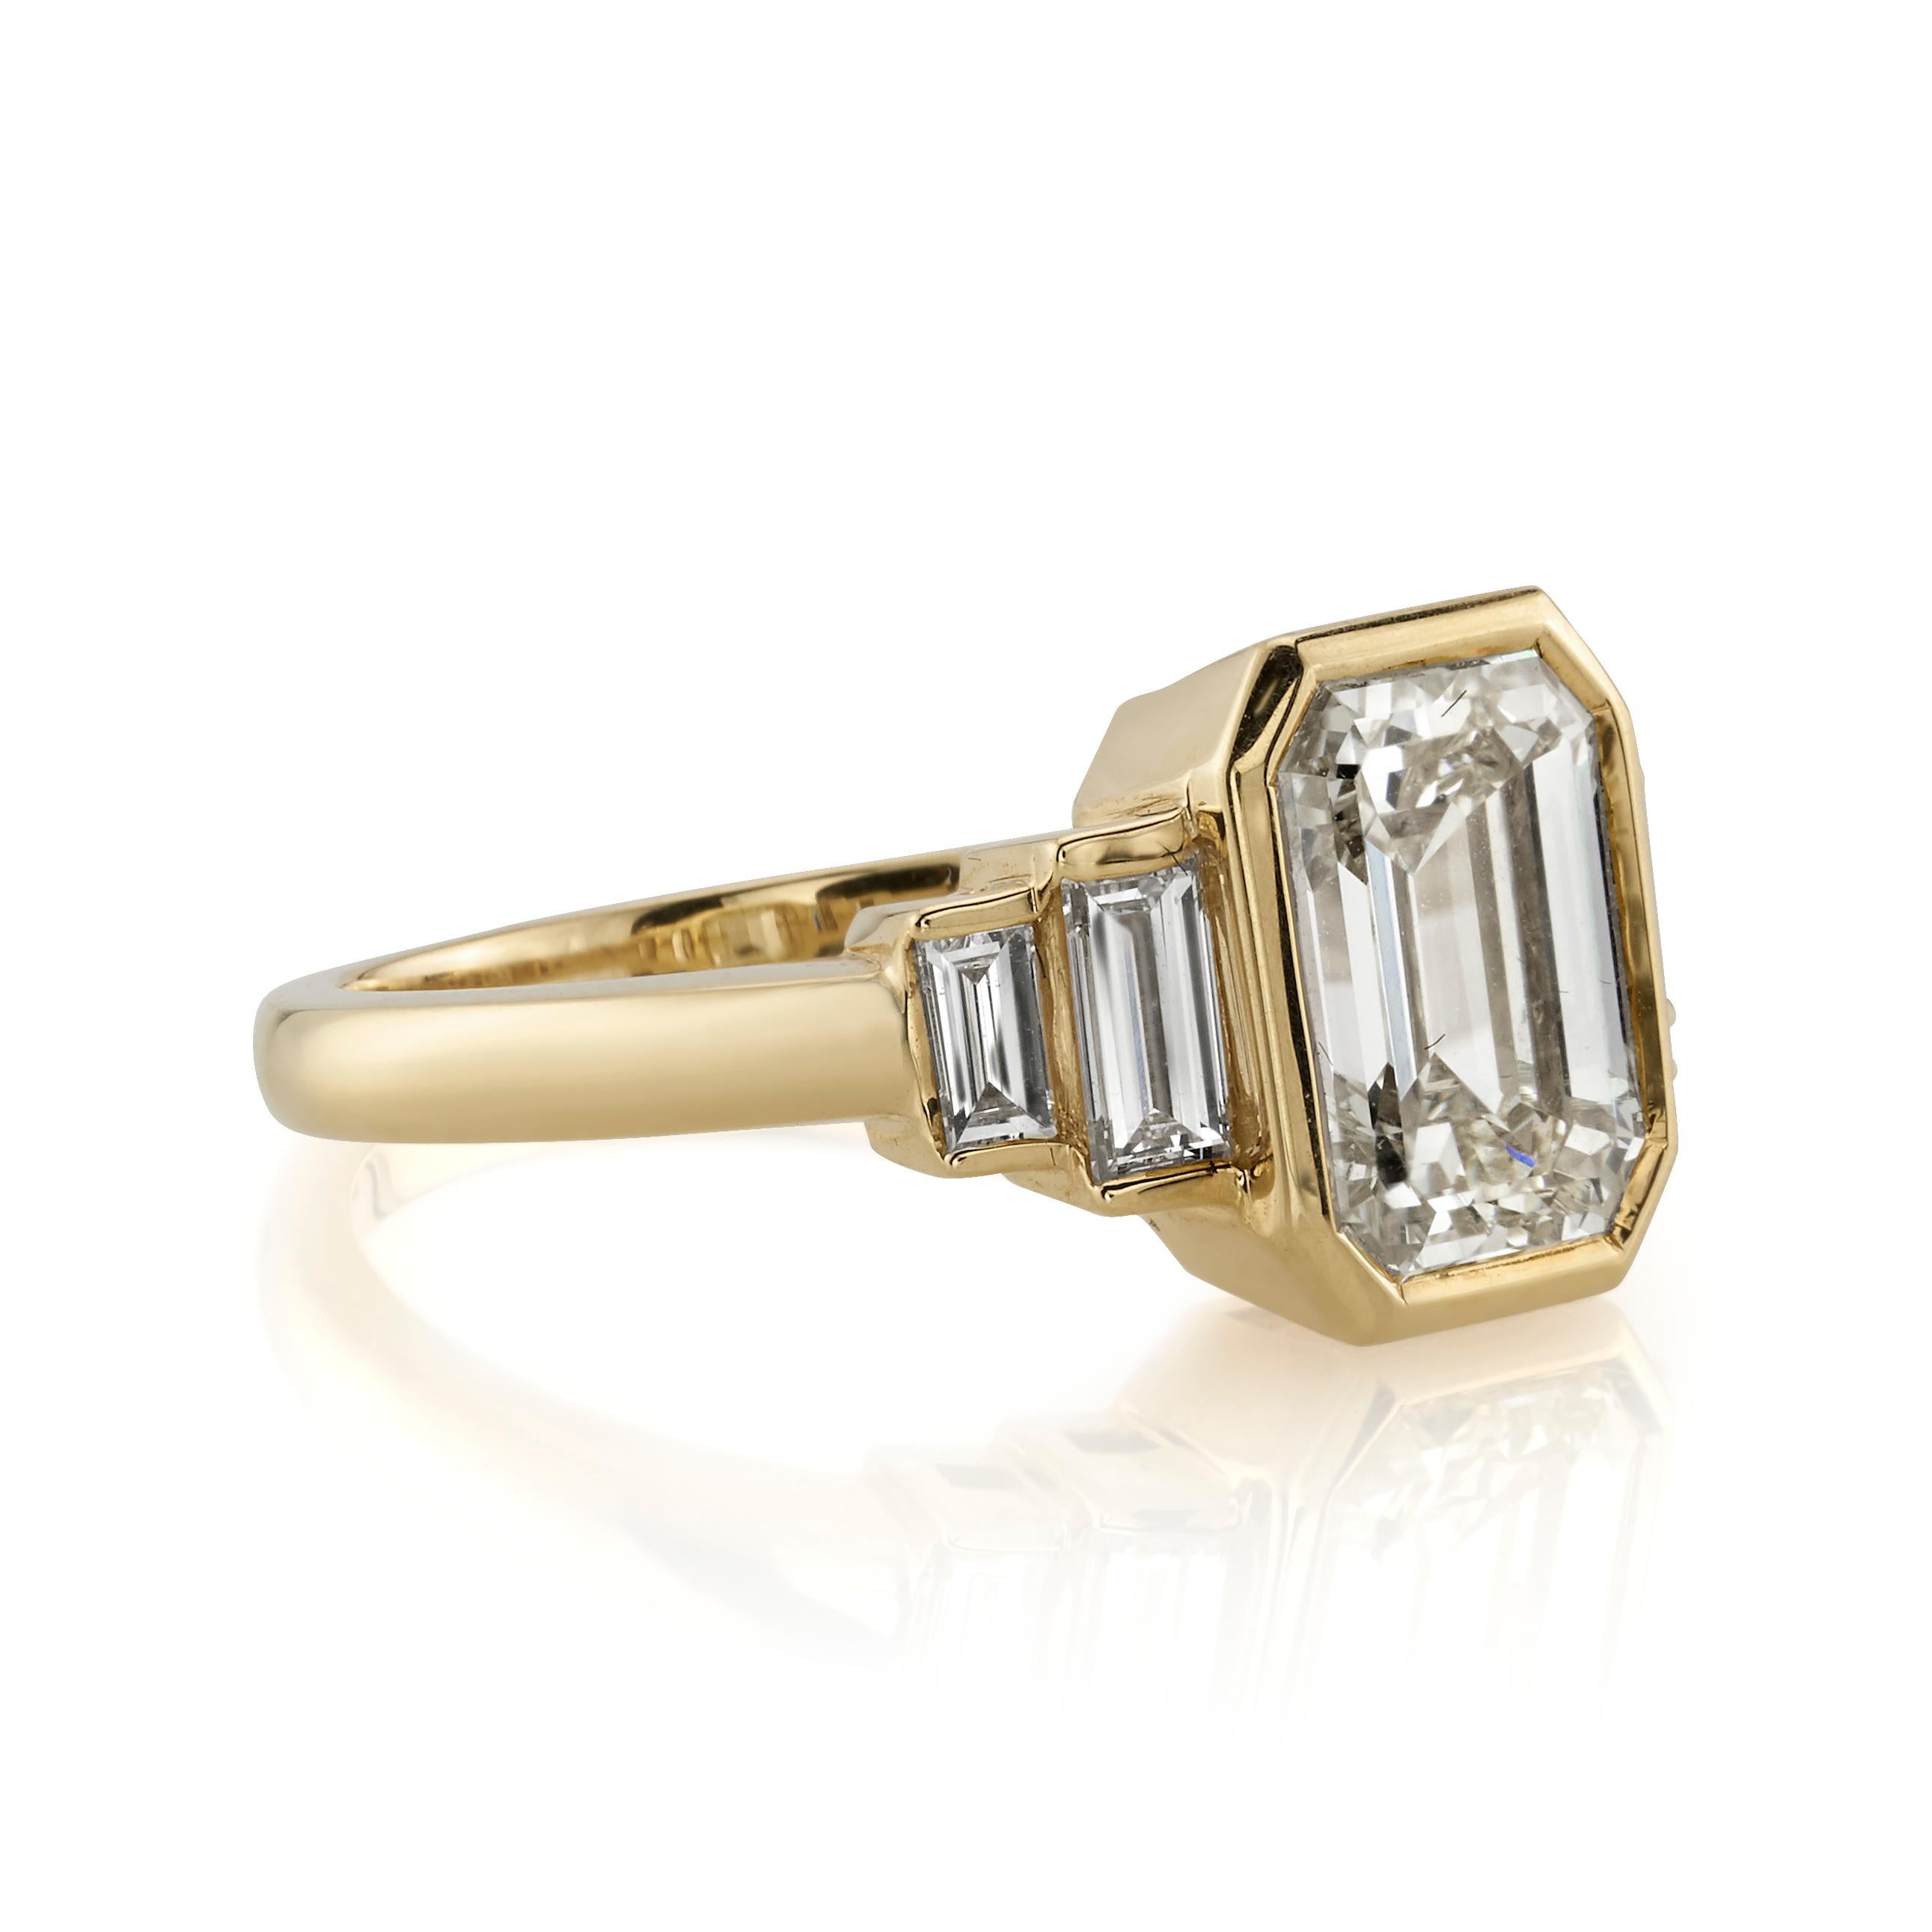 1.51ct H/SI1 EGL certified Emerald cut diamond with 0.38ctw baguette accents set in a handcrafted 18K yellow gold mounting. Ring is currently a size 6 and can be sized to fit.